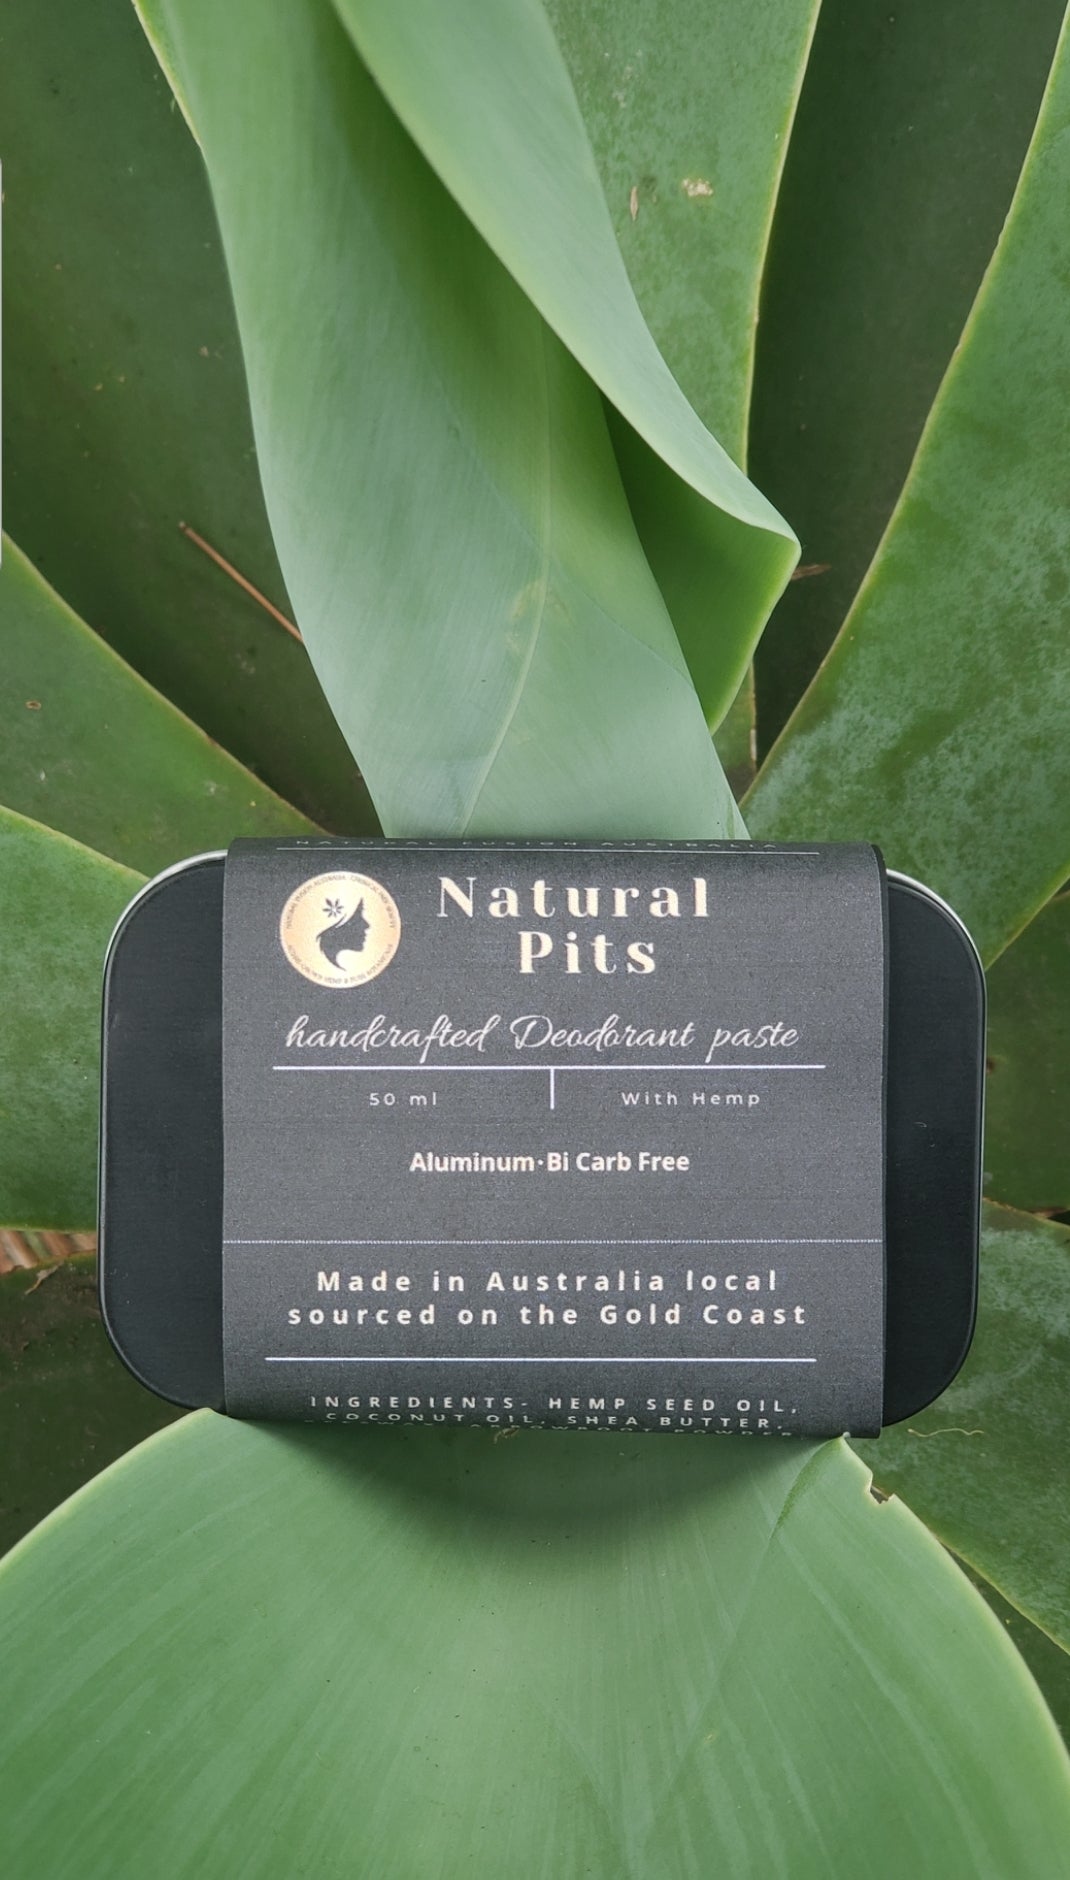 'Natural Pits' Hemp infused Handcrafted Natural Deodorant paste 50g